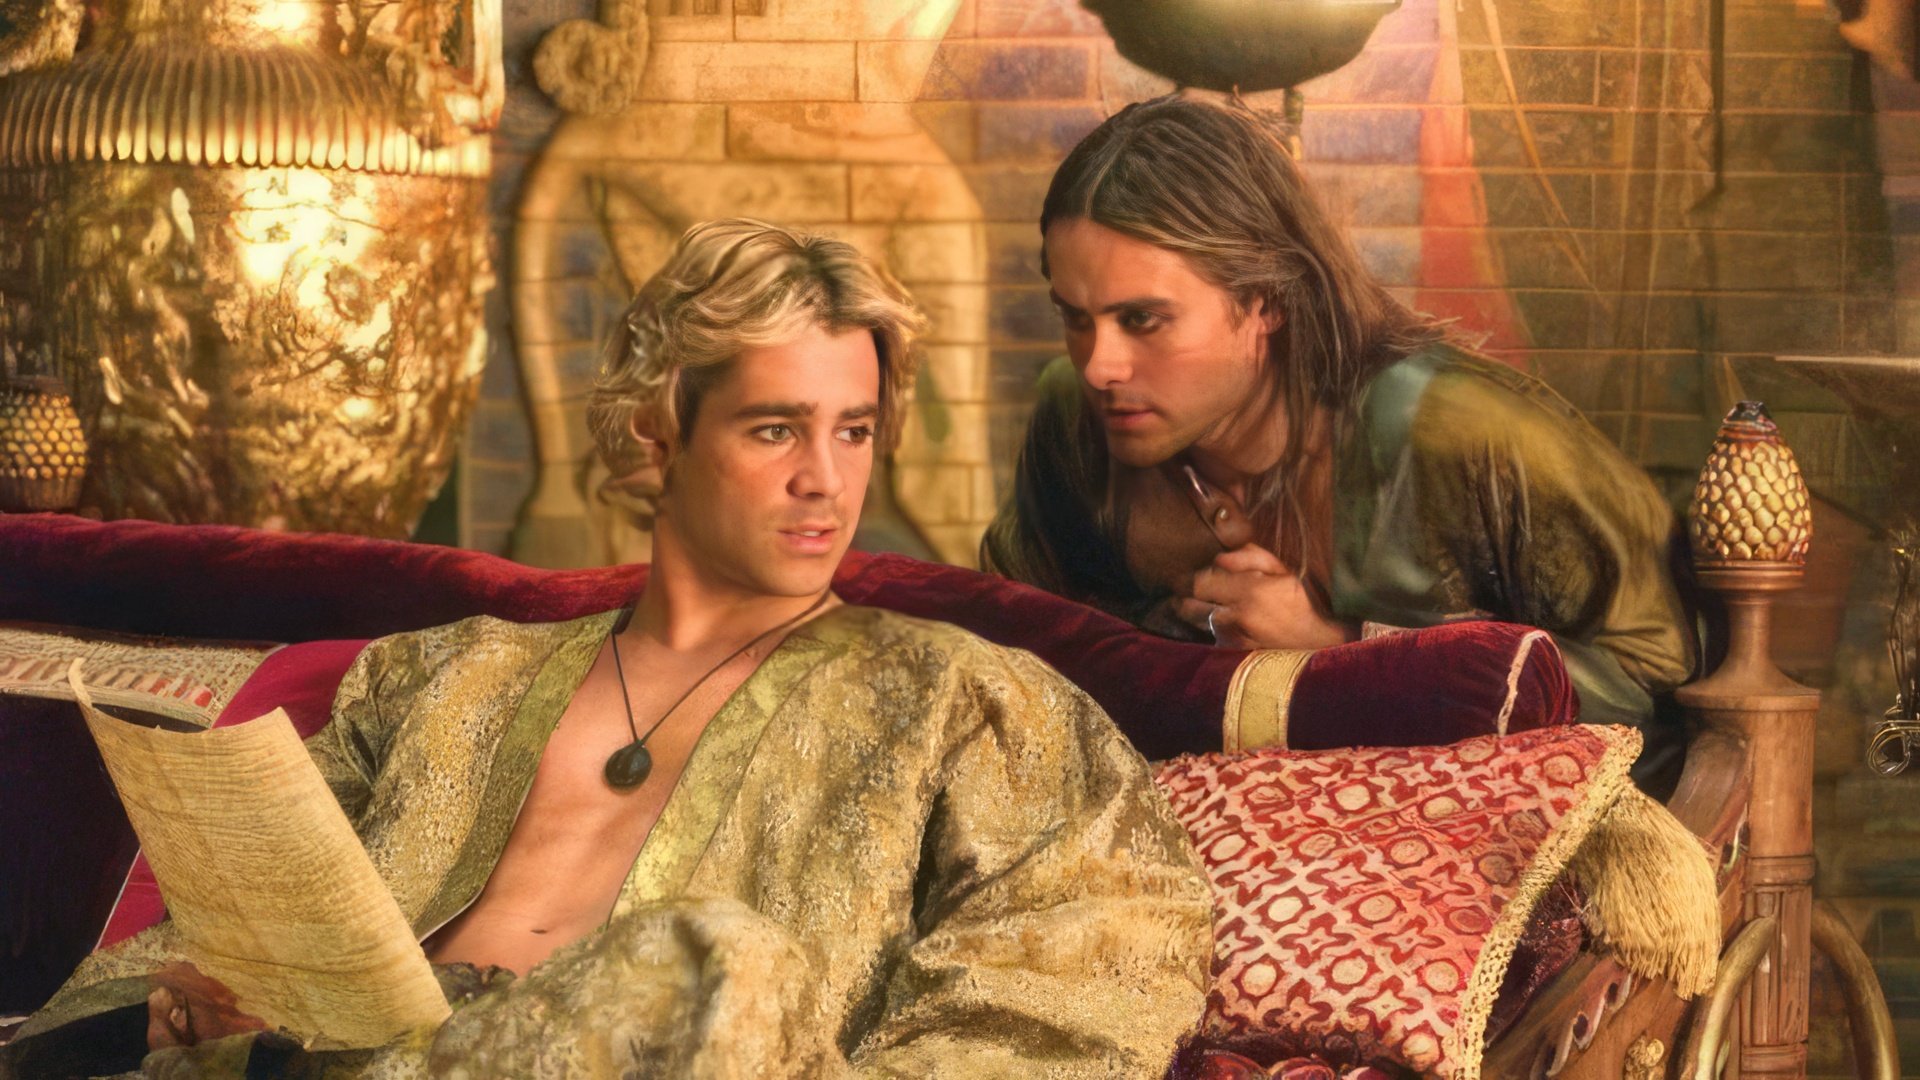 »Alexander»: Colin Farrell and Jared Leto showed the real meaning of true male friendship